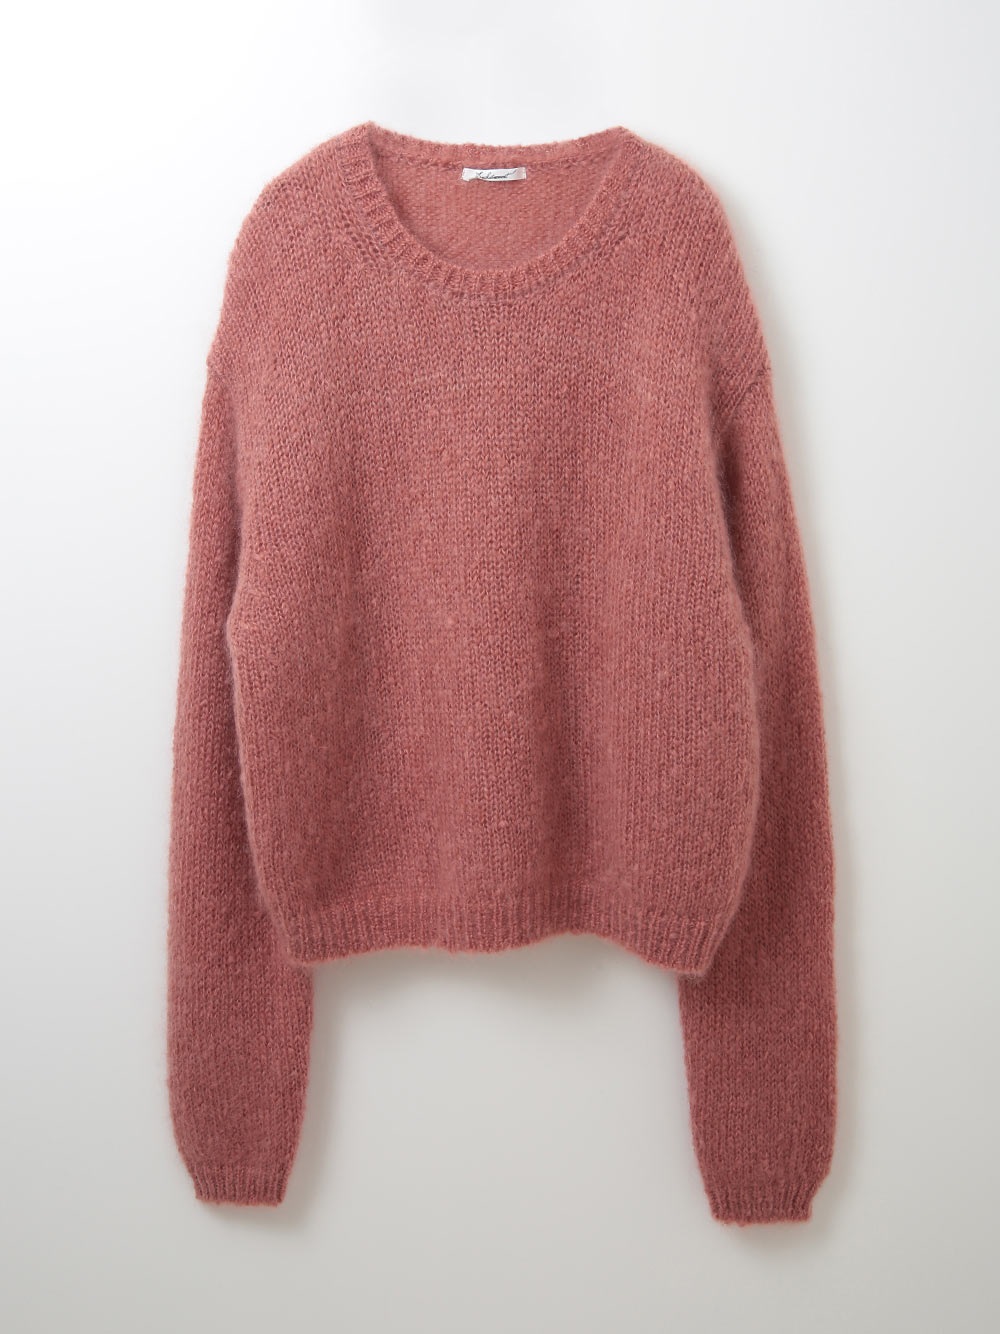 Mohair Knit Pullover